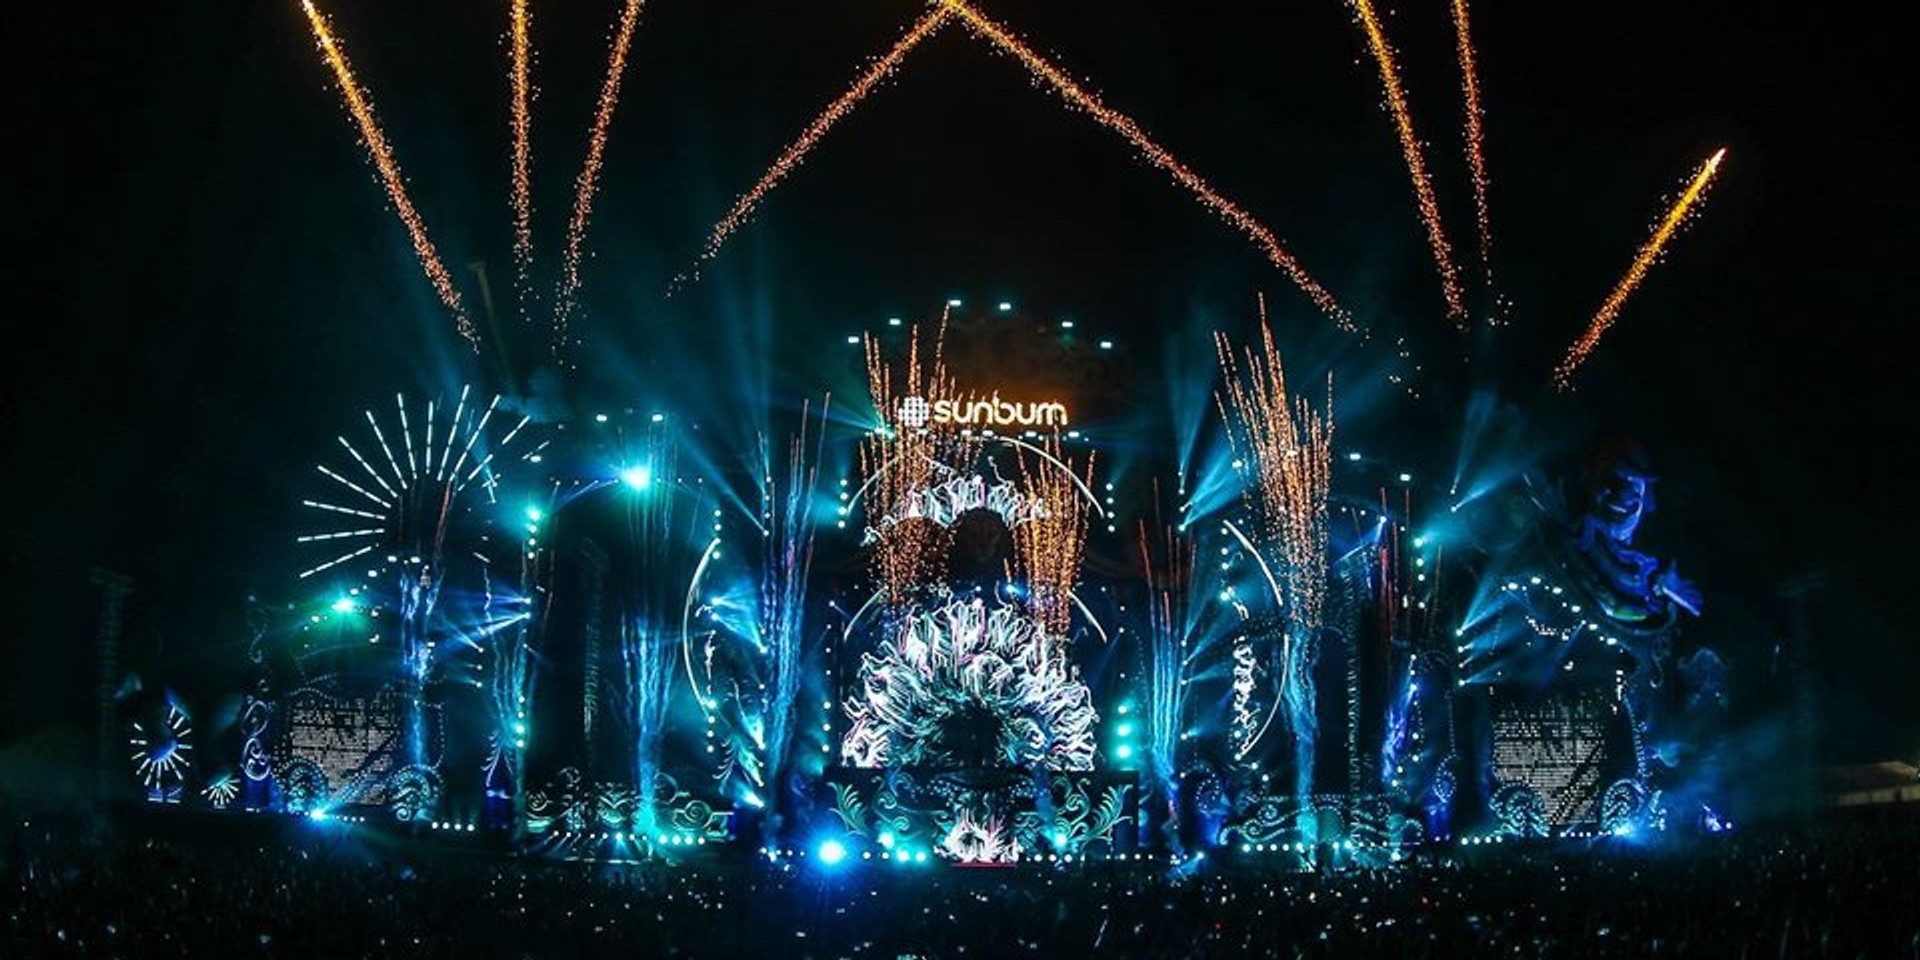 Asia's largest music festival, Sunburn, goes online with new extended reality technology 